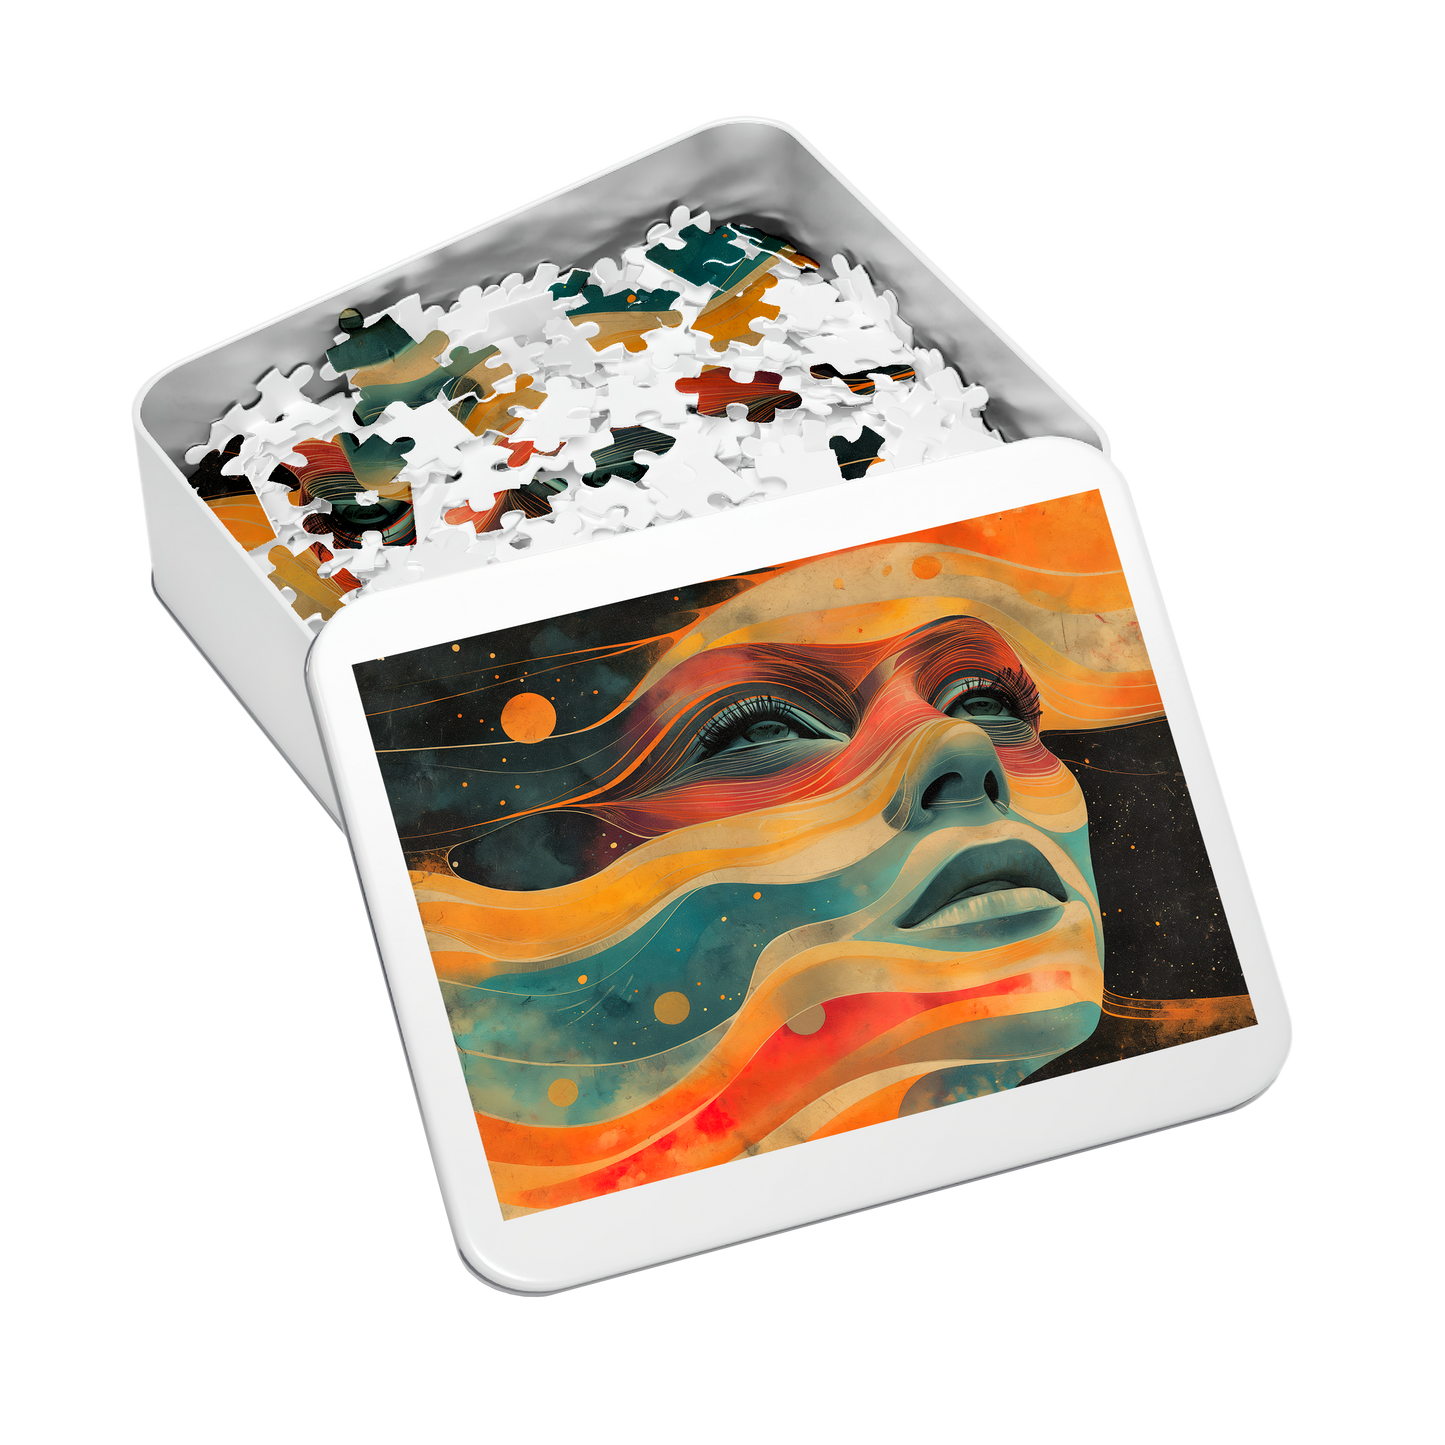 Flow Over - Premium Jigsaw Puzzle, Vibrant, Sci-fi - Multiple Sizes Available